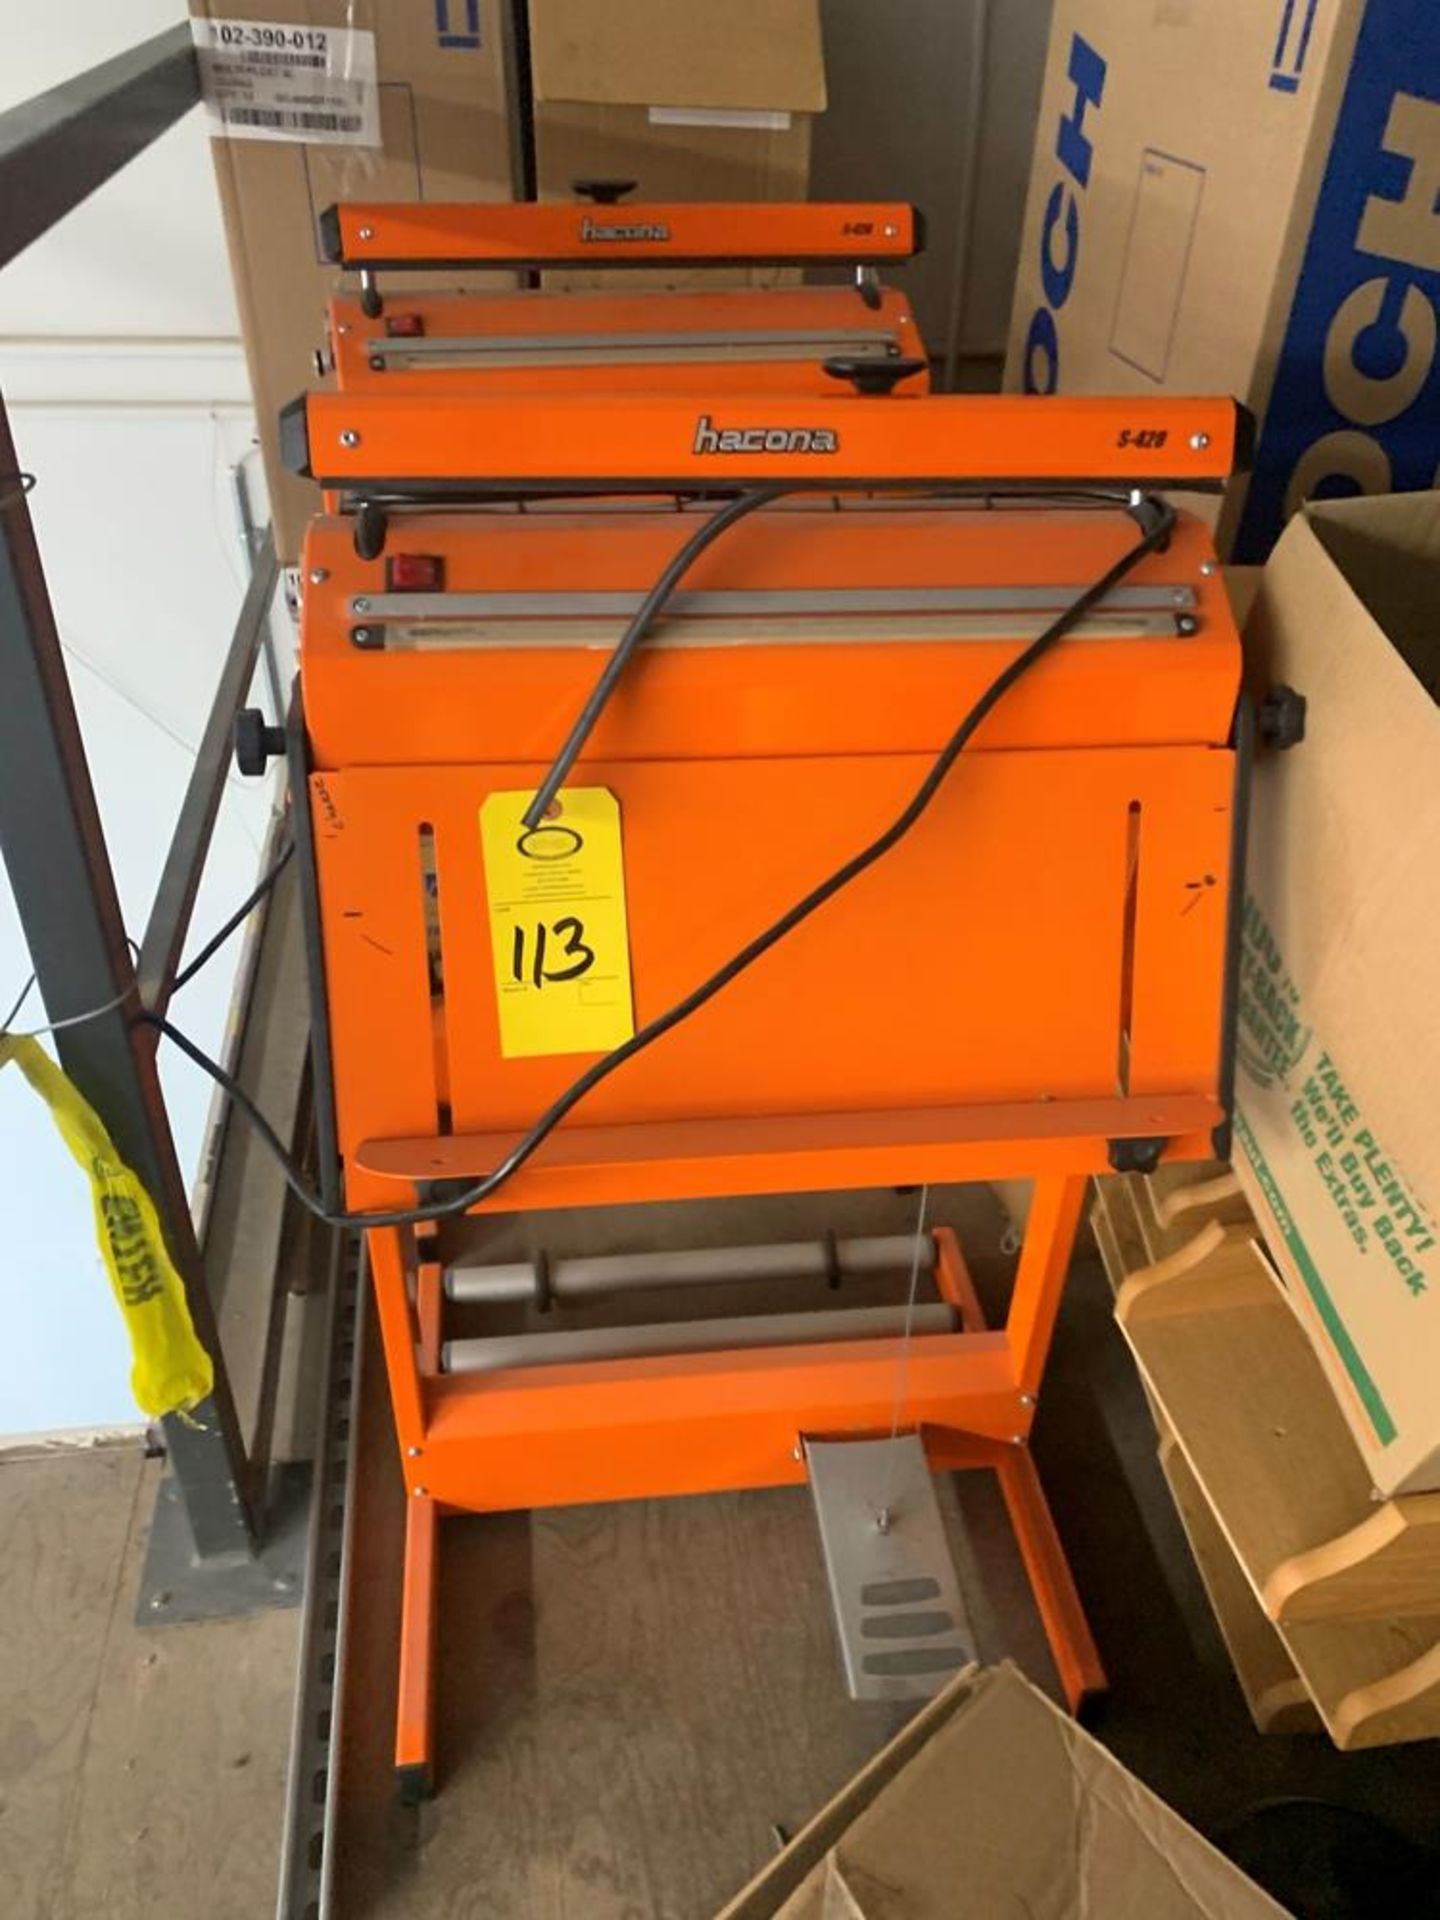 HACNOA Mdl. S420 Manual Sealer, 18" seal bar (Required Loading Fee: $50.00) NO HAND CARRY (Price - Image 4 of 4